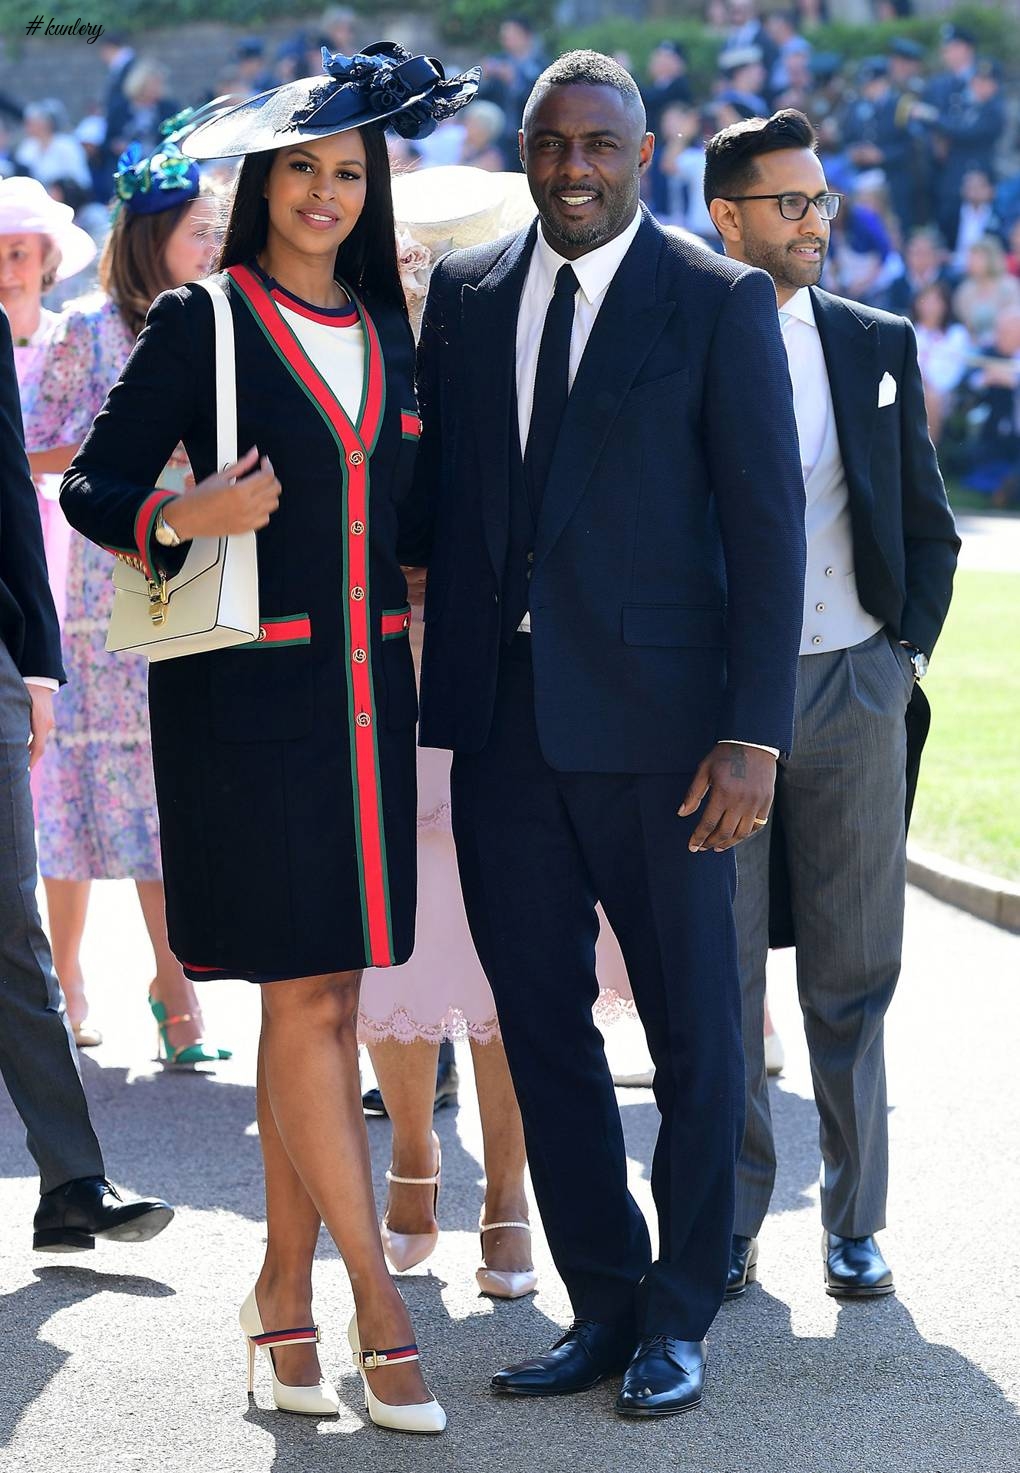 Best Dressed Guests At Prince Harry & Meghan Markle’s Royal Wedding!